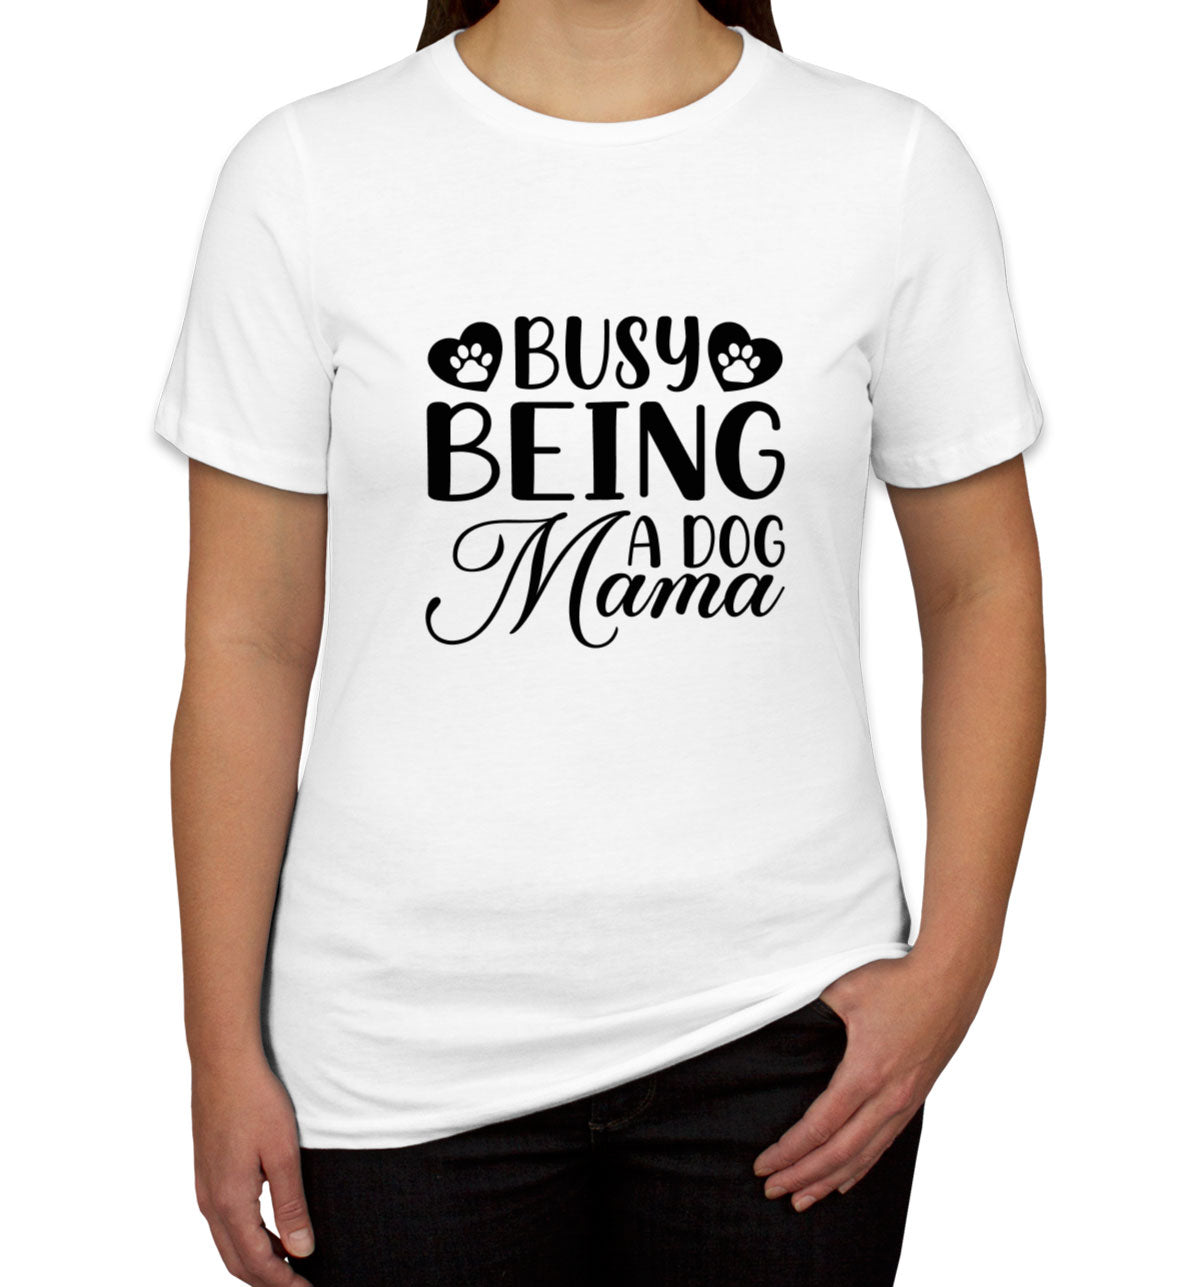 Busy Being A Dog Mama Women's T-shirt